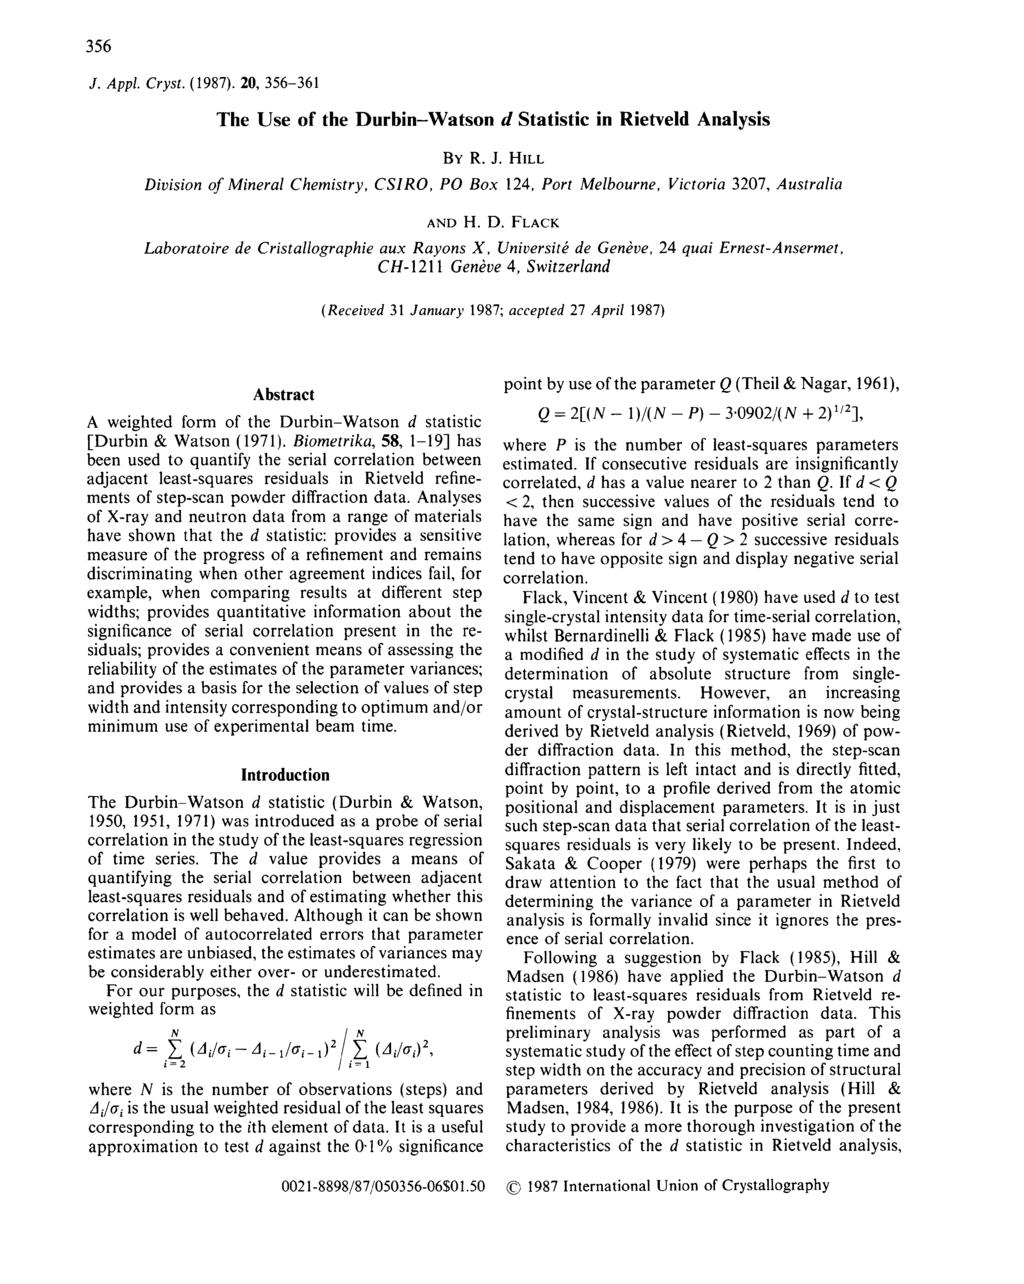 356 J. Appl. Cryst. (1987). 20, 356-361 The Use of the Durbin-Watson Statistic in Rietvel Analysis BY R. J. HILL Division of Mineral Chemistry, CSIRO, PO Box 124, Port Melbourne, Victoria 3207, Australia AND H.